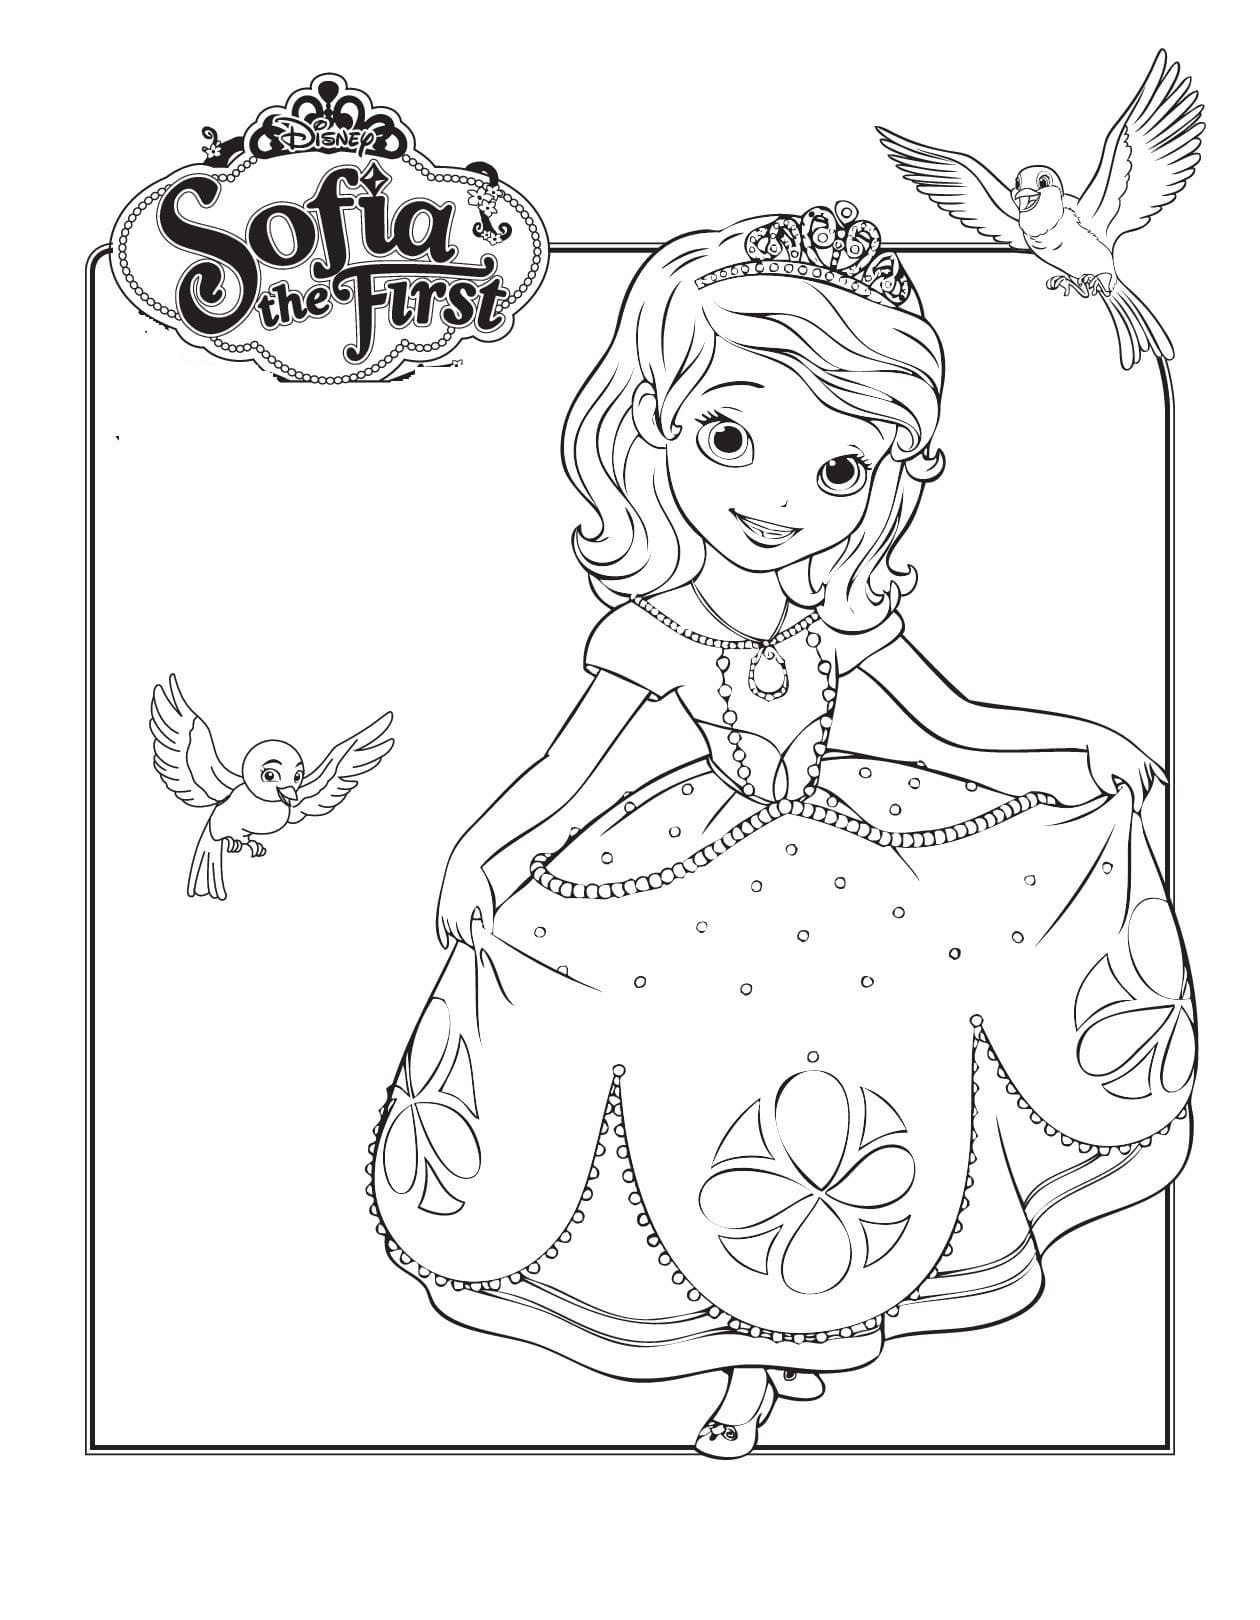 Coloring page Sofia the First cartoon for children